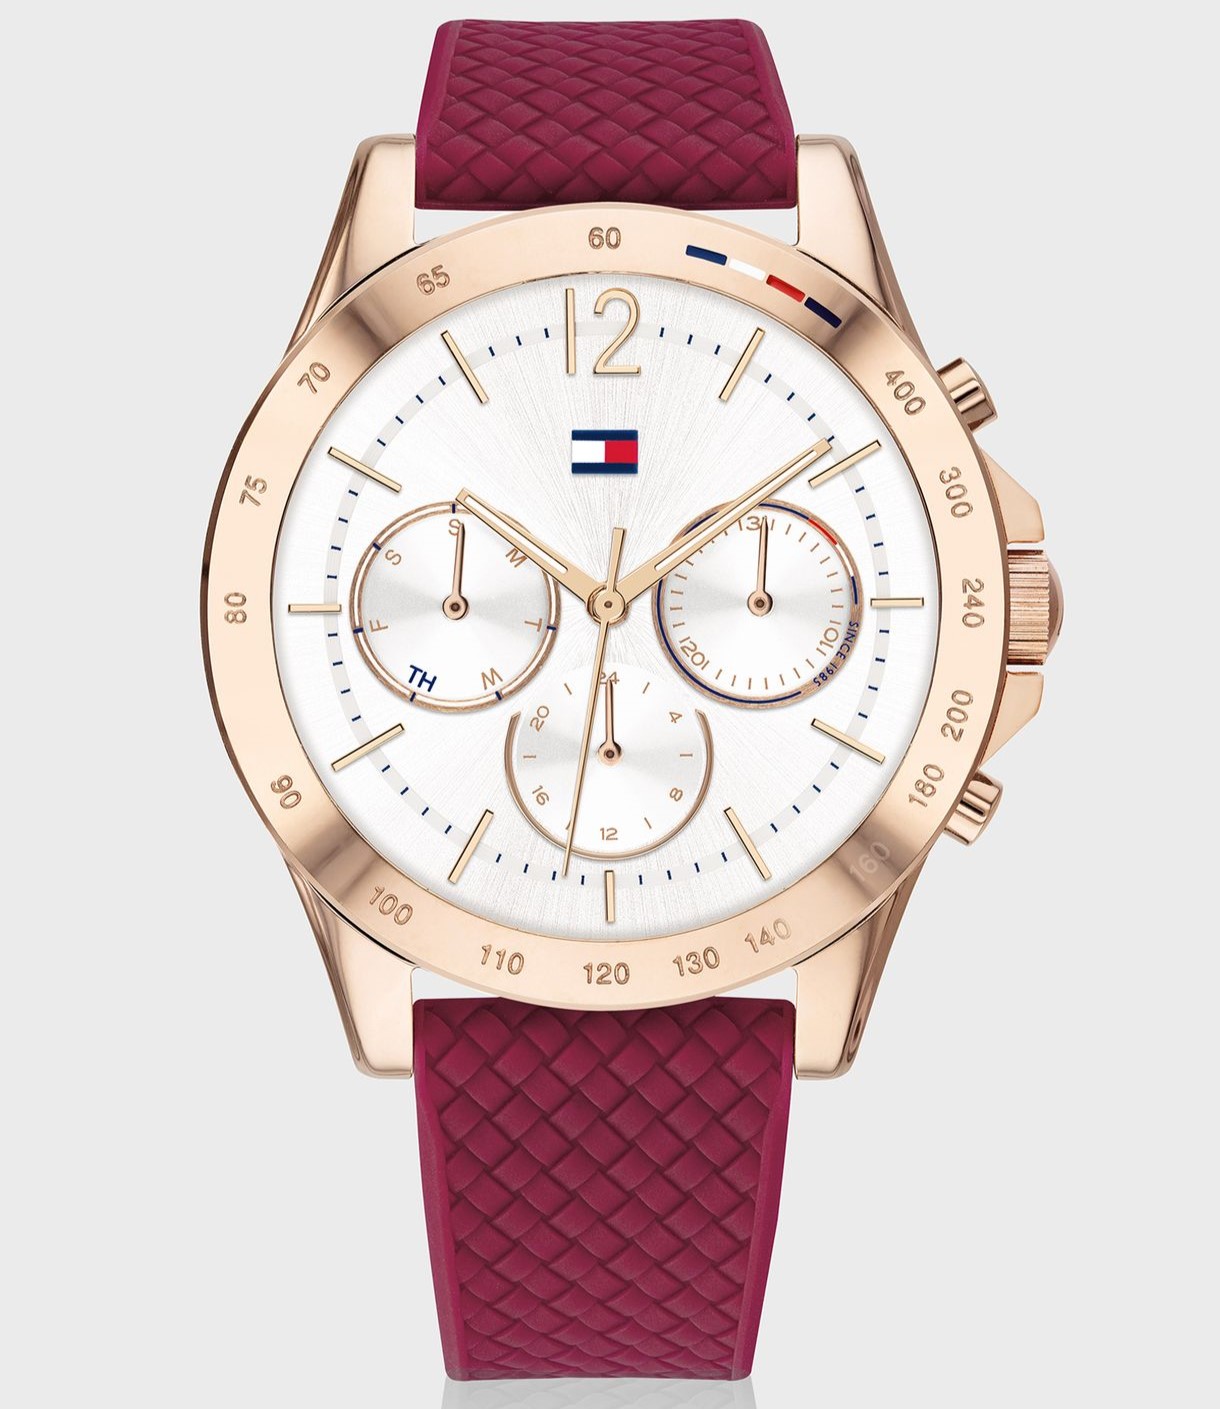 ĐỒNG HỒ ĐEO TAY NỮ TOMMY HILFIGER ROSE GOLD SPORT WATCH WITH RED SILICONE STRAP HAVEN ANALOG WATCH FOR WOMEN TH1782200W 6